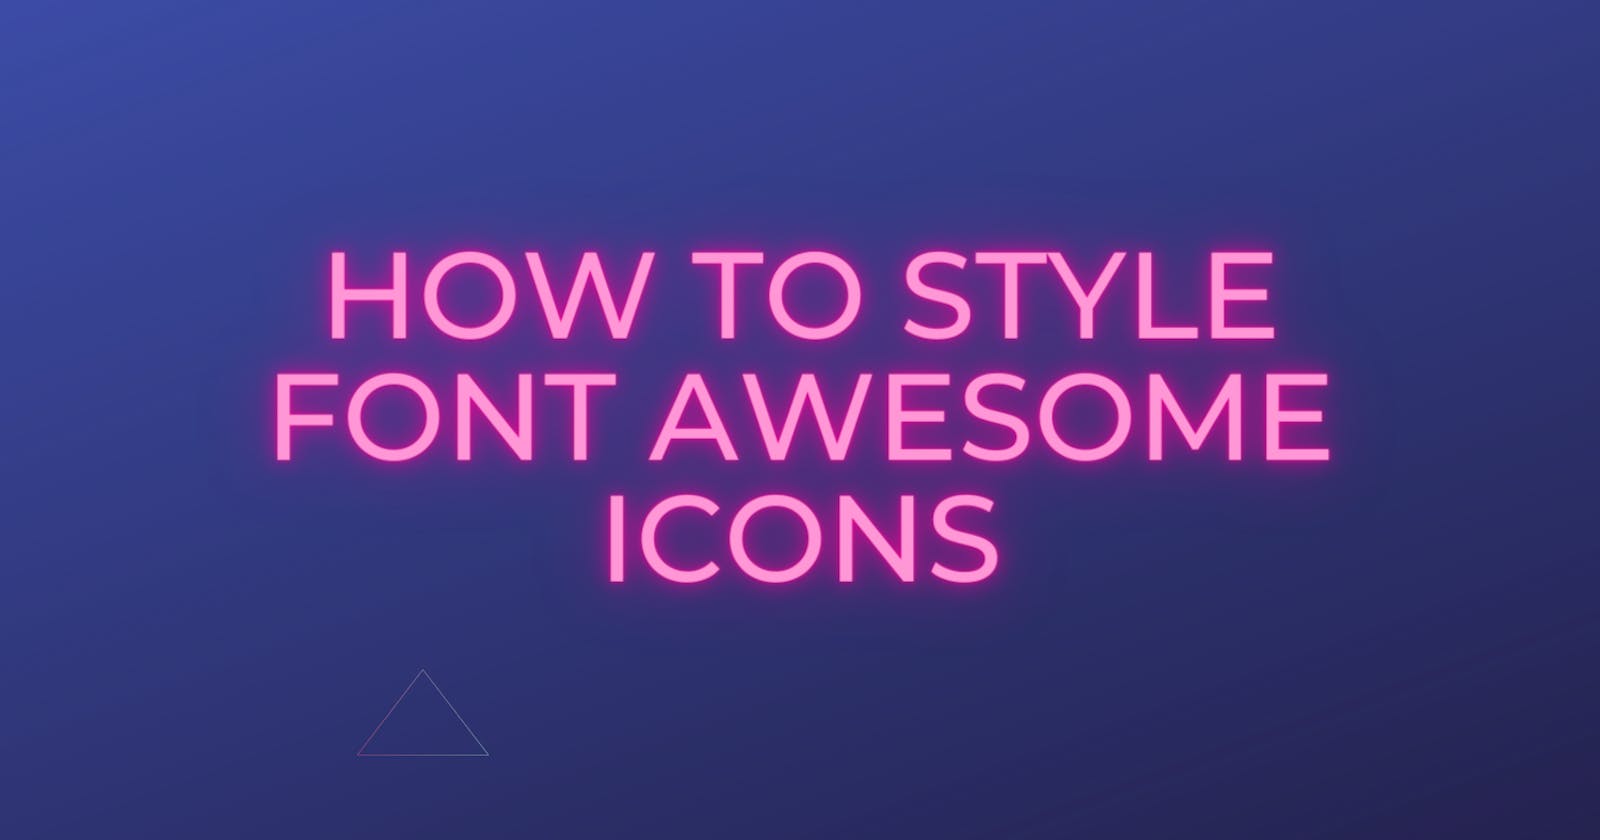 How To Style Font Awesome Icons